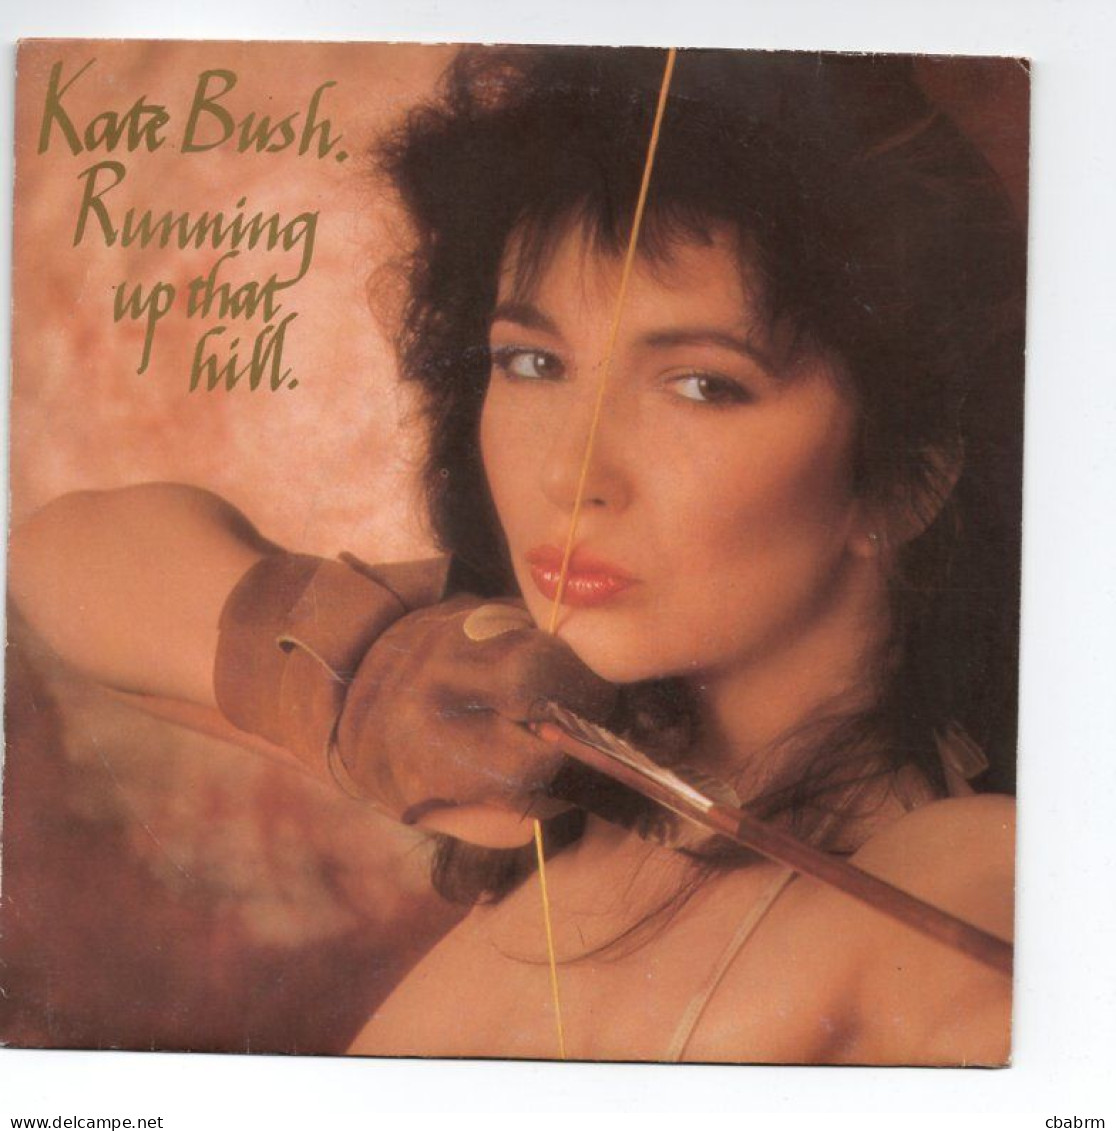 SP 45 TOURS KATE BUSH RUNNING UP THAT HILL 1985 FRANCE EMI 2007577 TBE - 7" - Rock